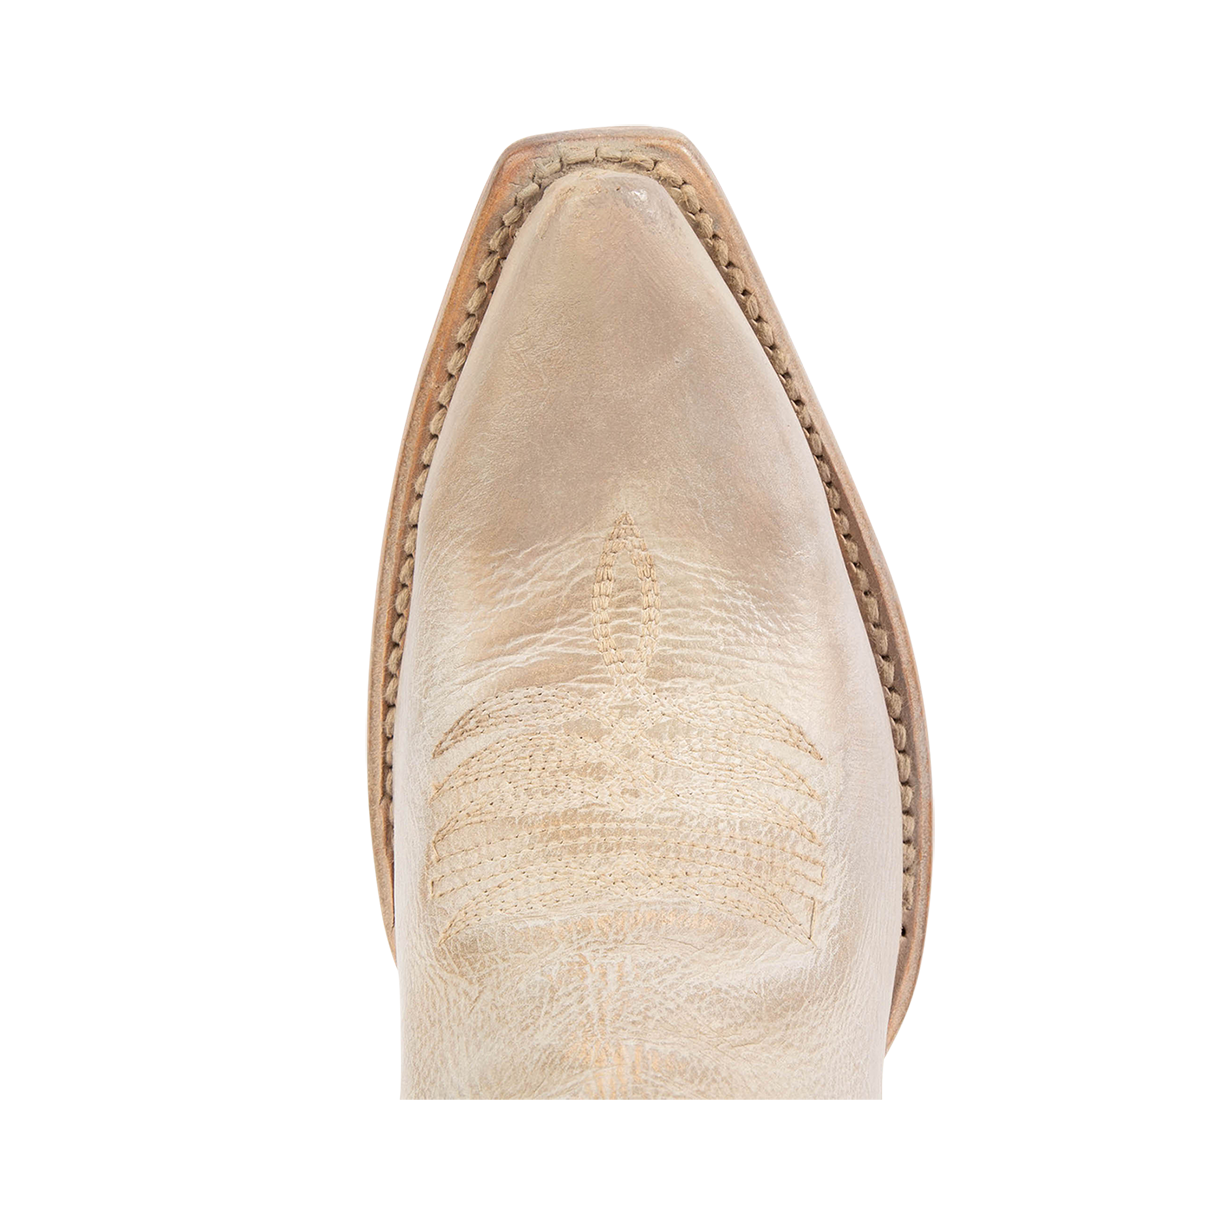 Top view showing snip toe with traditional stitching on FREEBIRD women's Wolfgang beige tall western boot